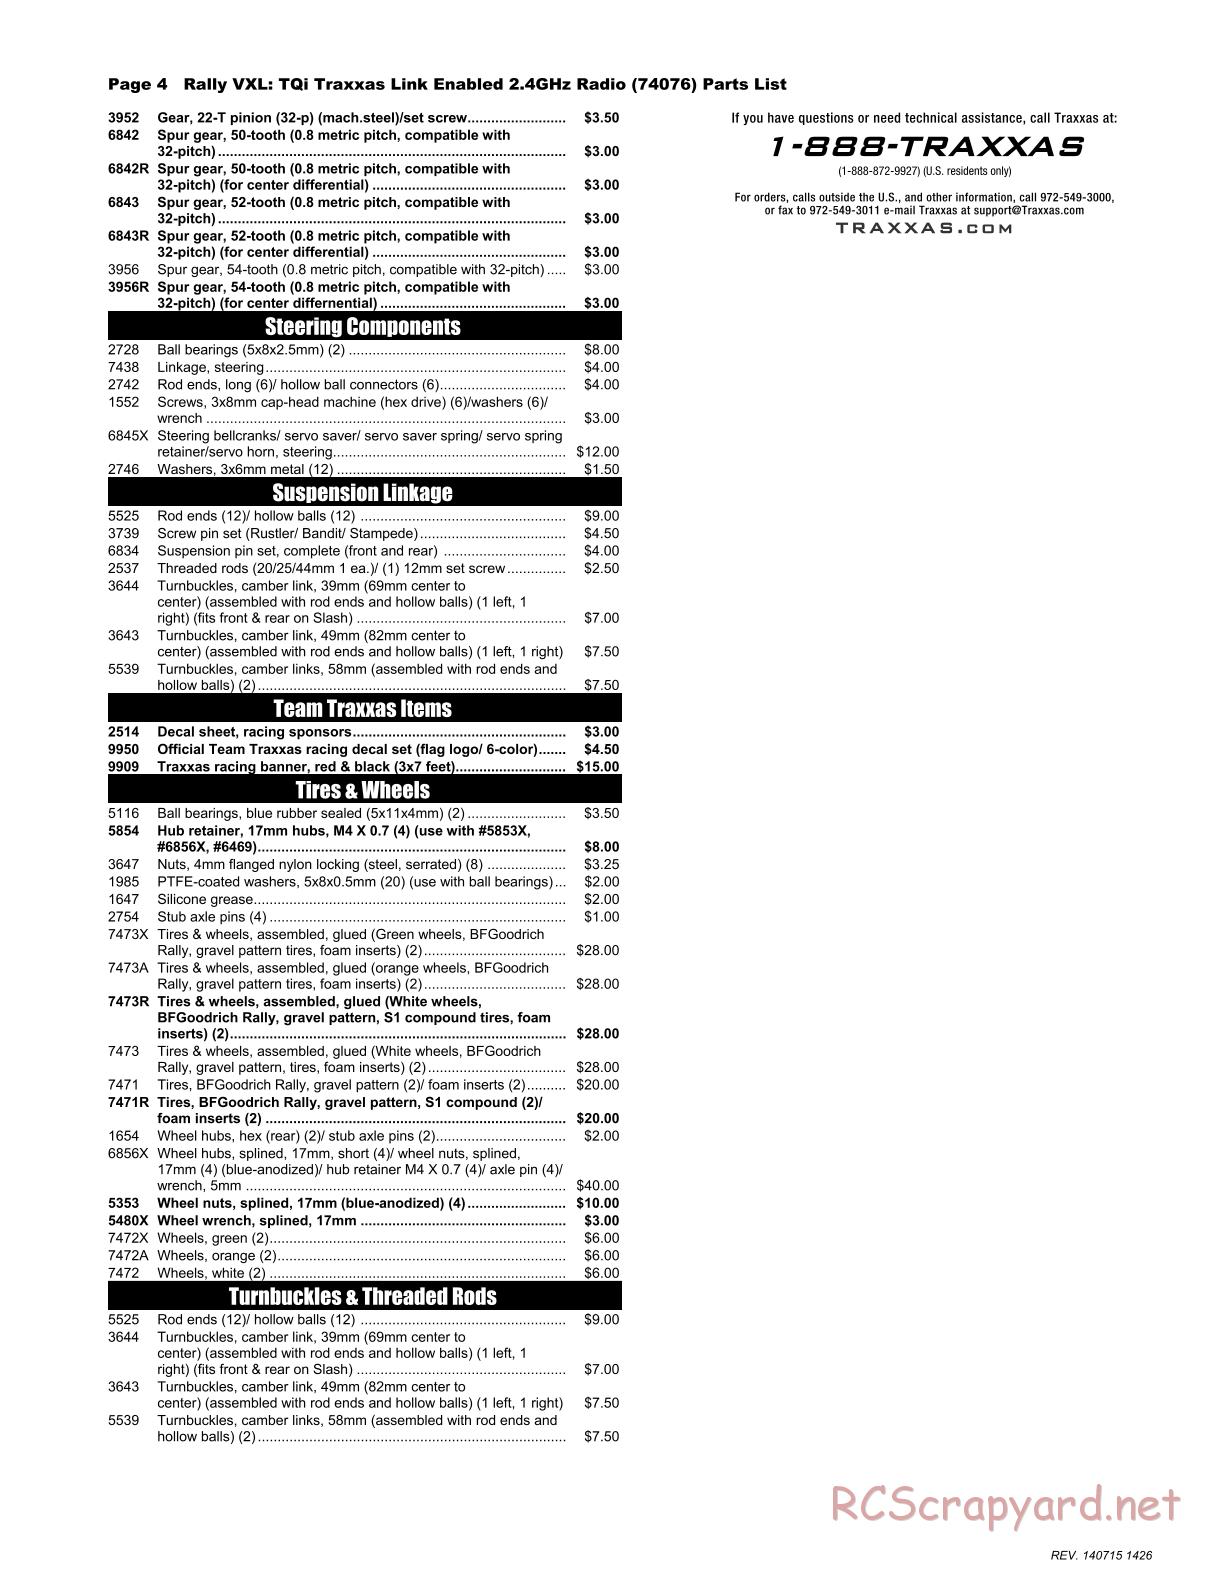 Traxxas - Rally (2014) - Parts List - Page 4